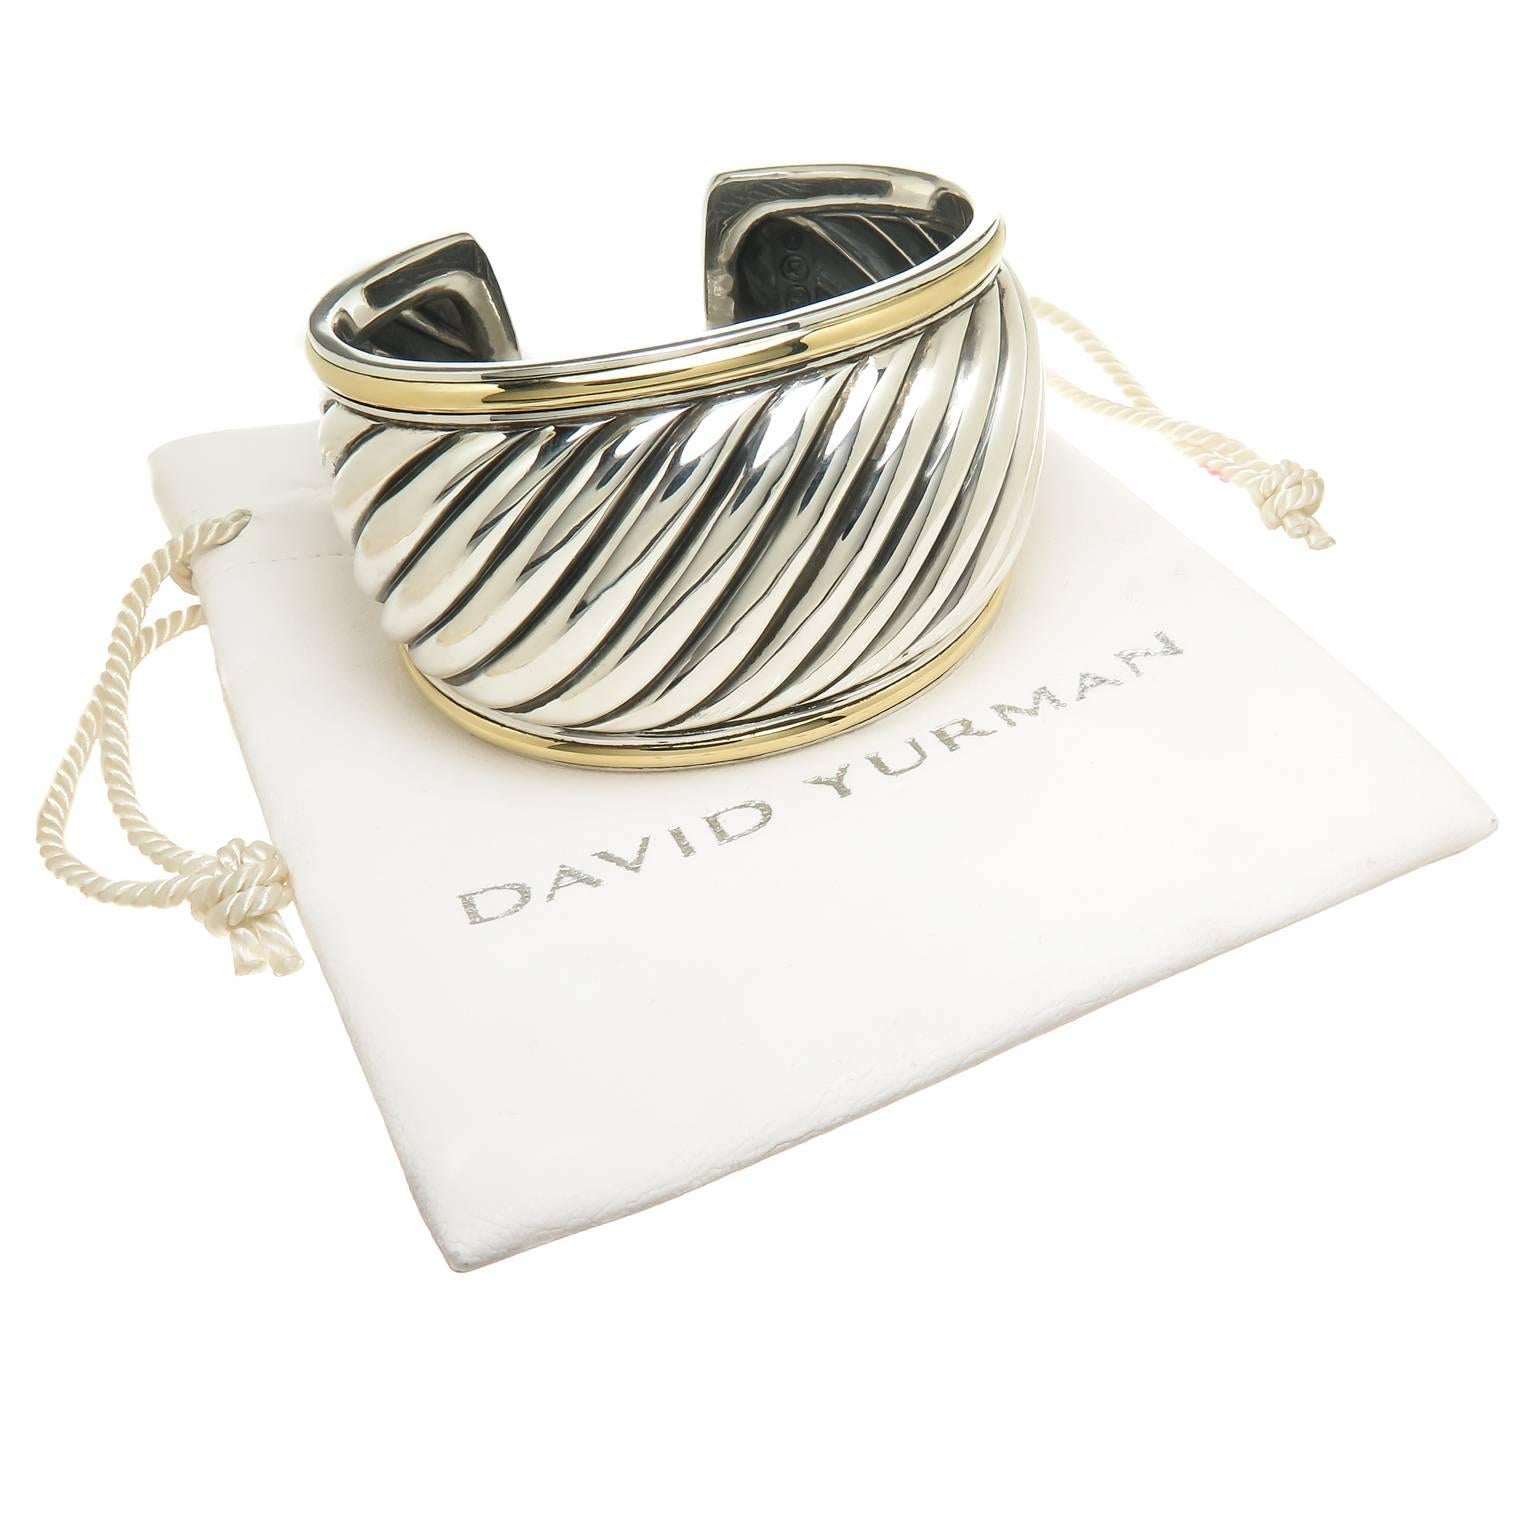 Circa 2005 David Yurman 18K yellow Gold and Sterling Silver Thoroughbred collection cuff Bracelet, measuring 1 5/8 inch wide and tapering down to 1 1/8 inch, 3/4 inch wide opening and is pliable to be opened to fit most any wrist. comes in the